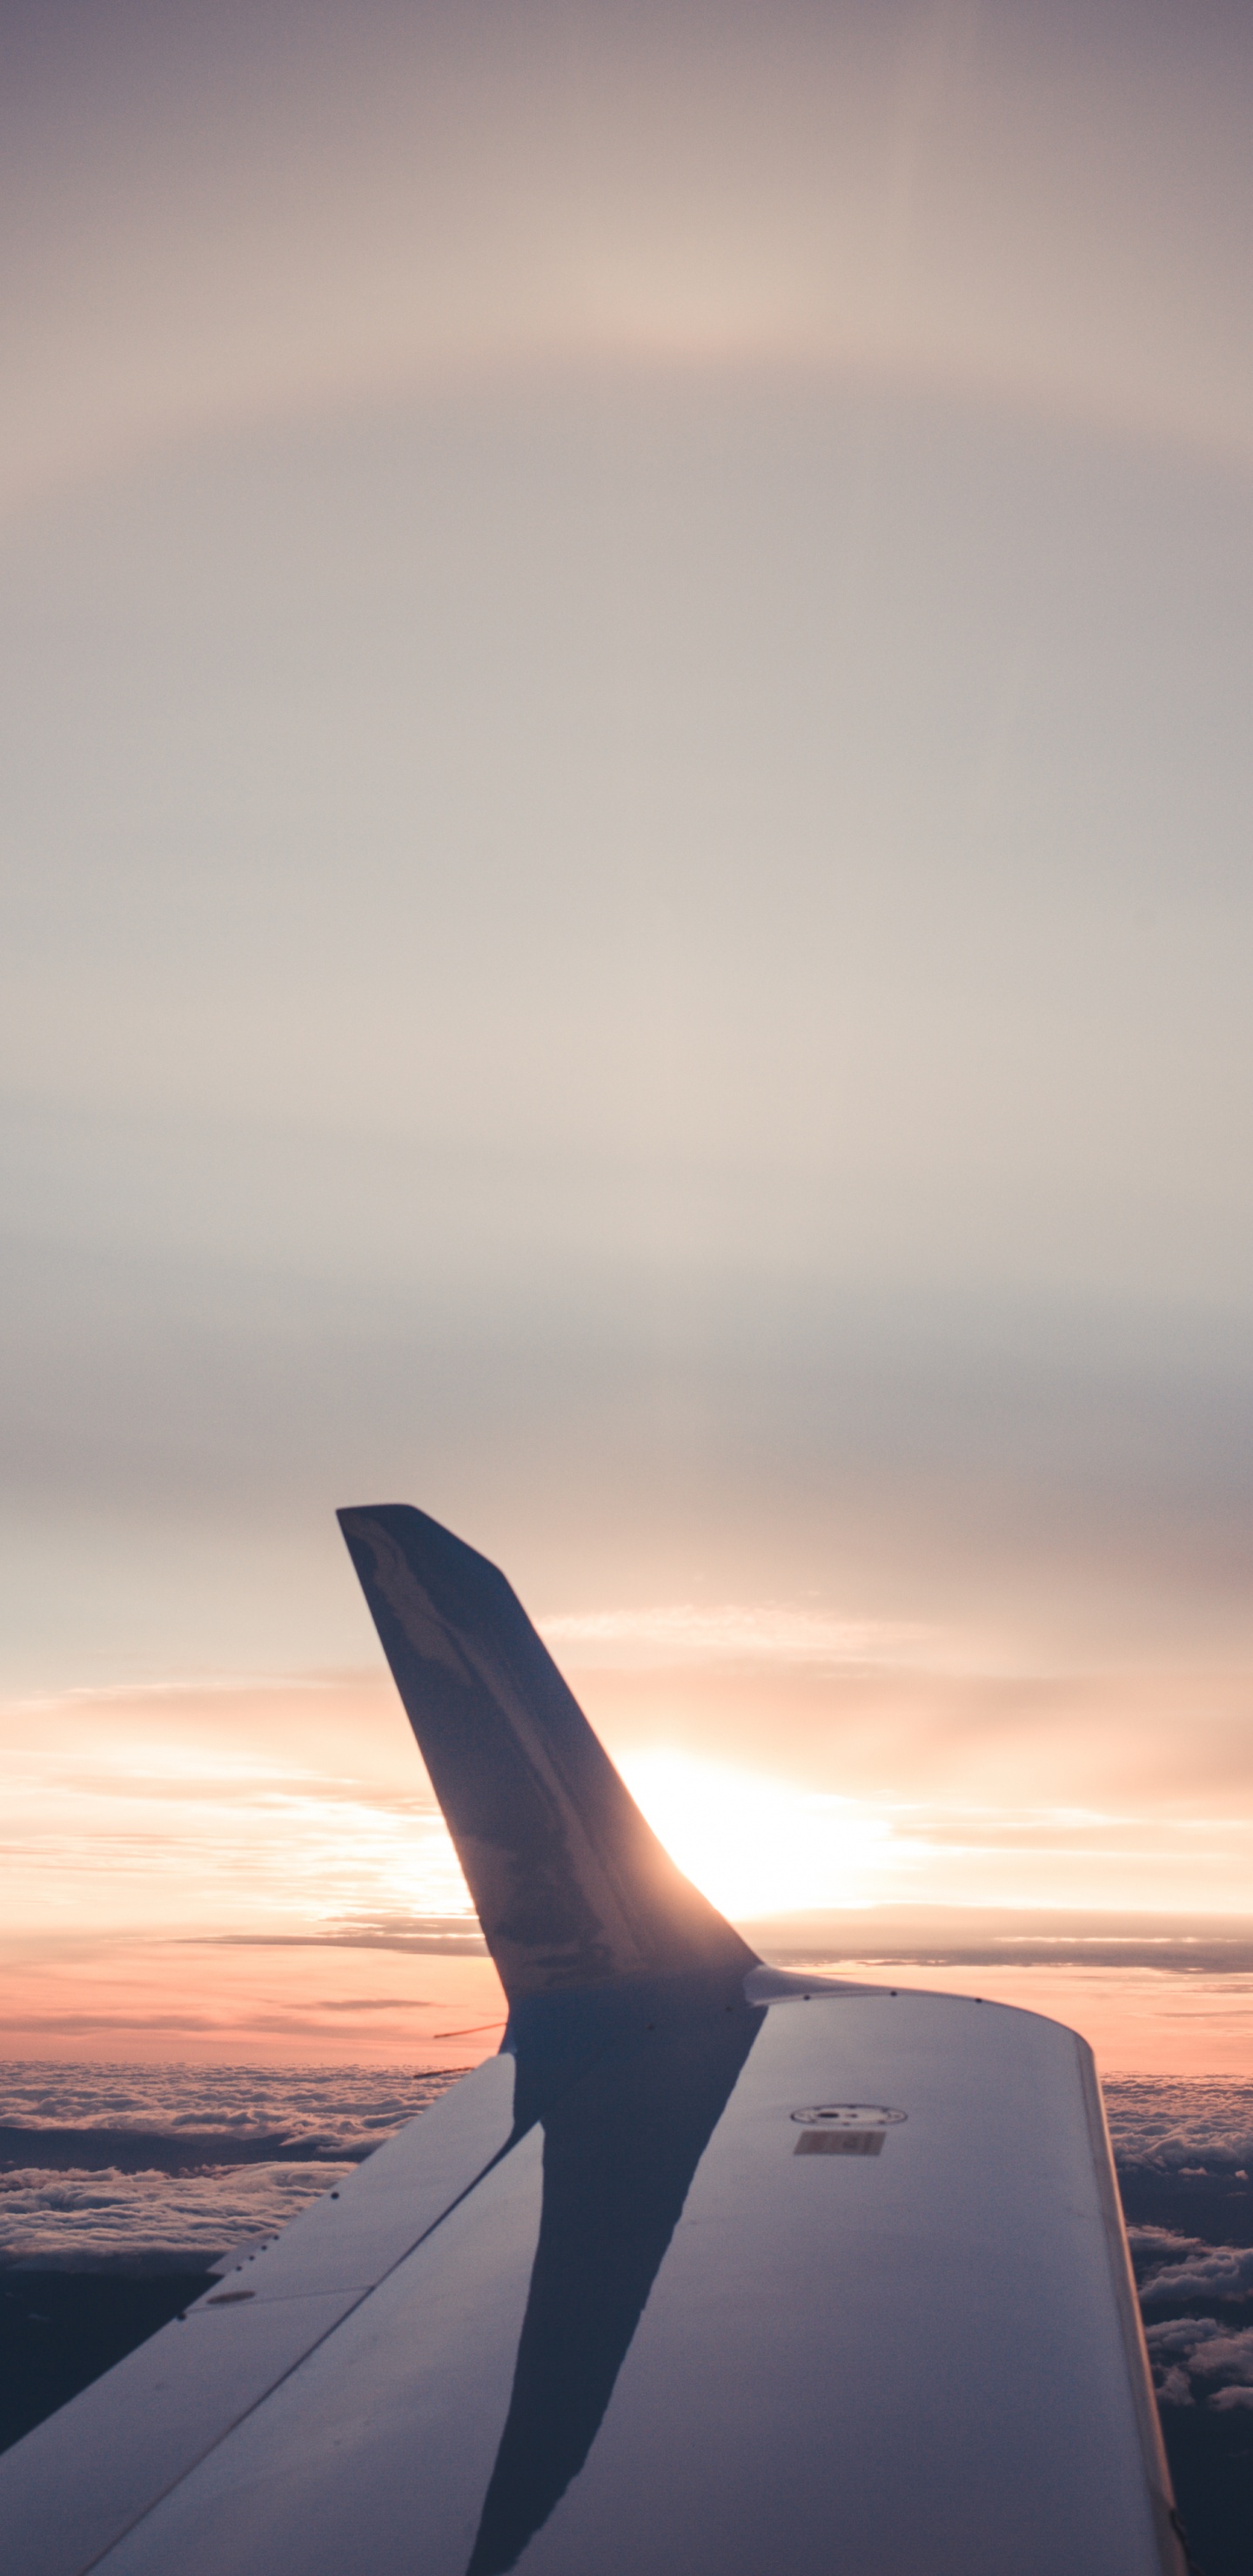 White and Black Airplane Wing During Daytime. Wallpaper in 1440x2960 Resolution